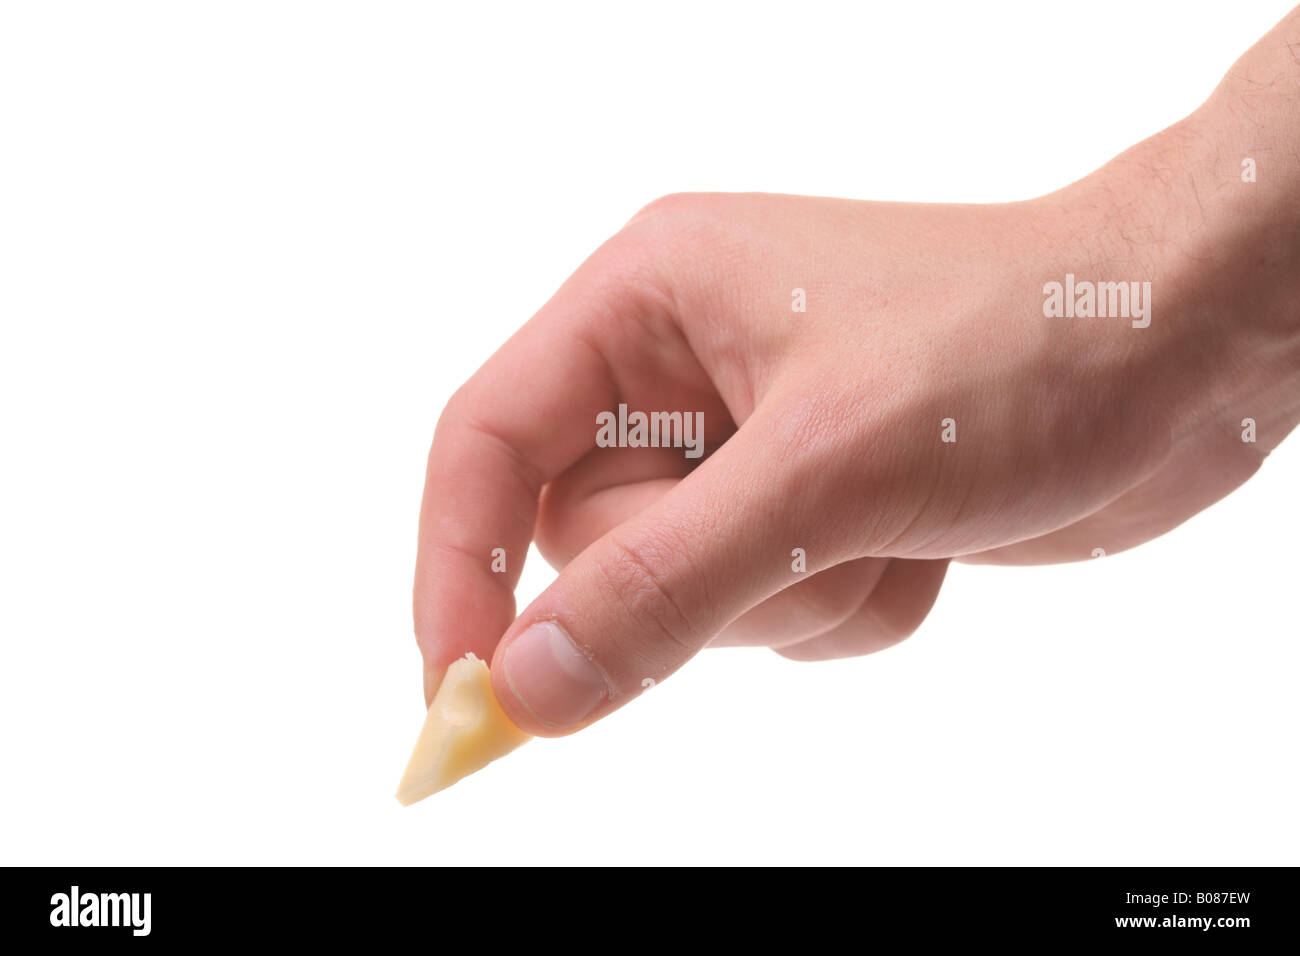 Hand holding a piece of cheese Stock Photo